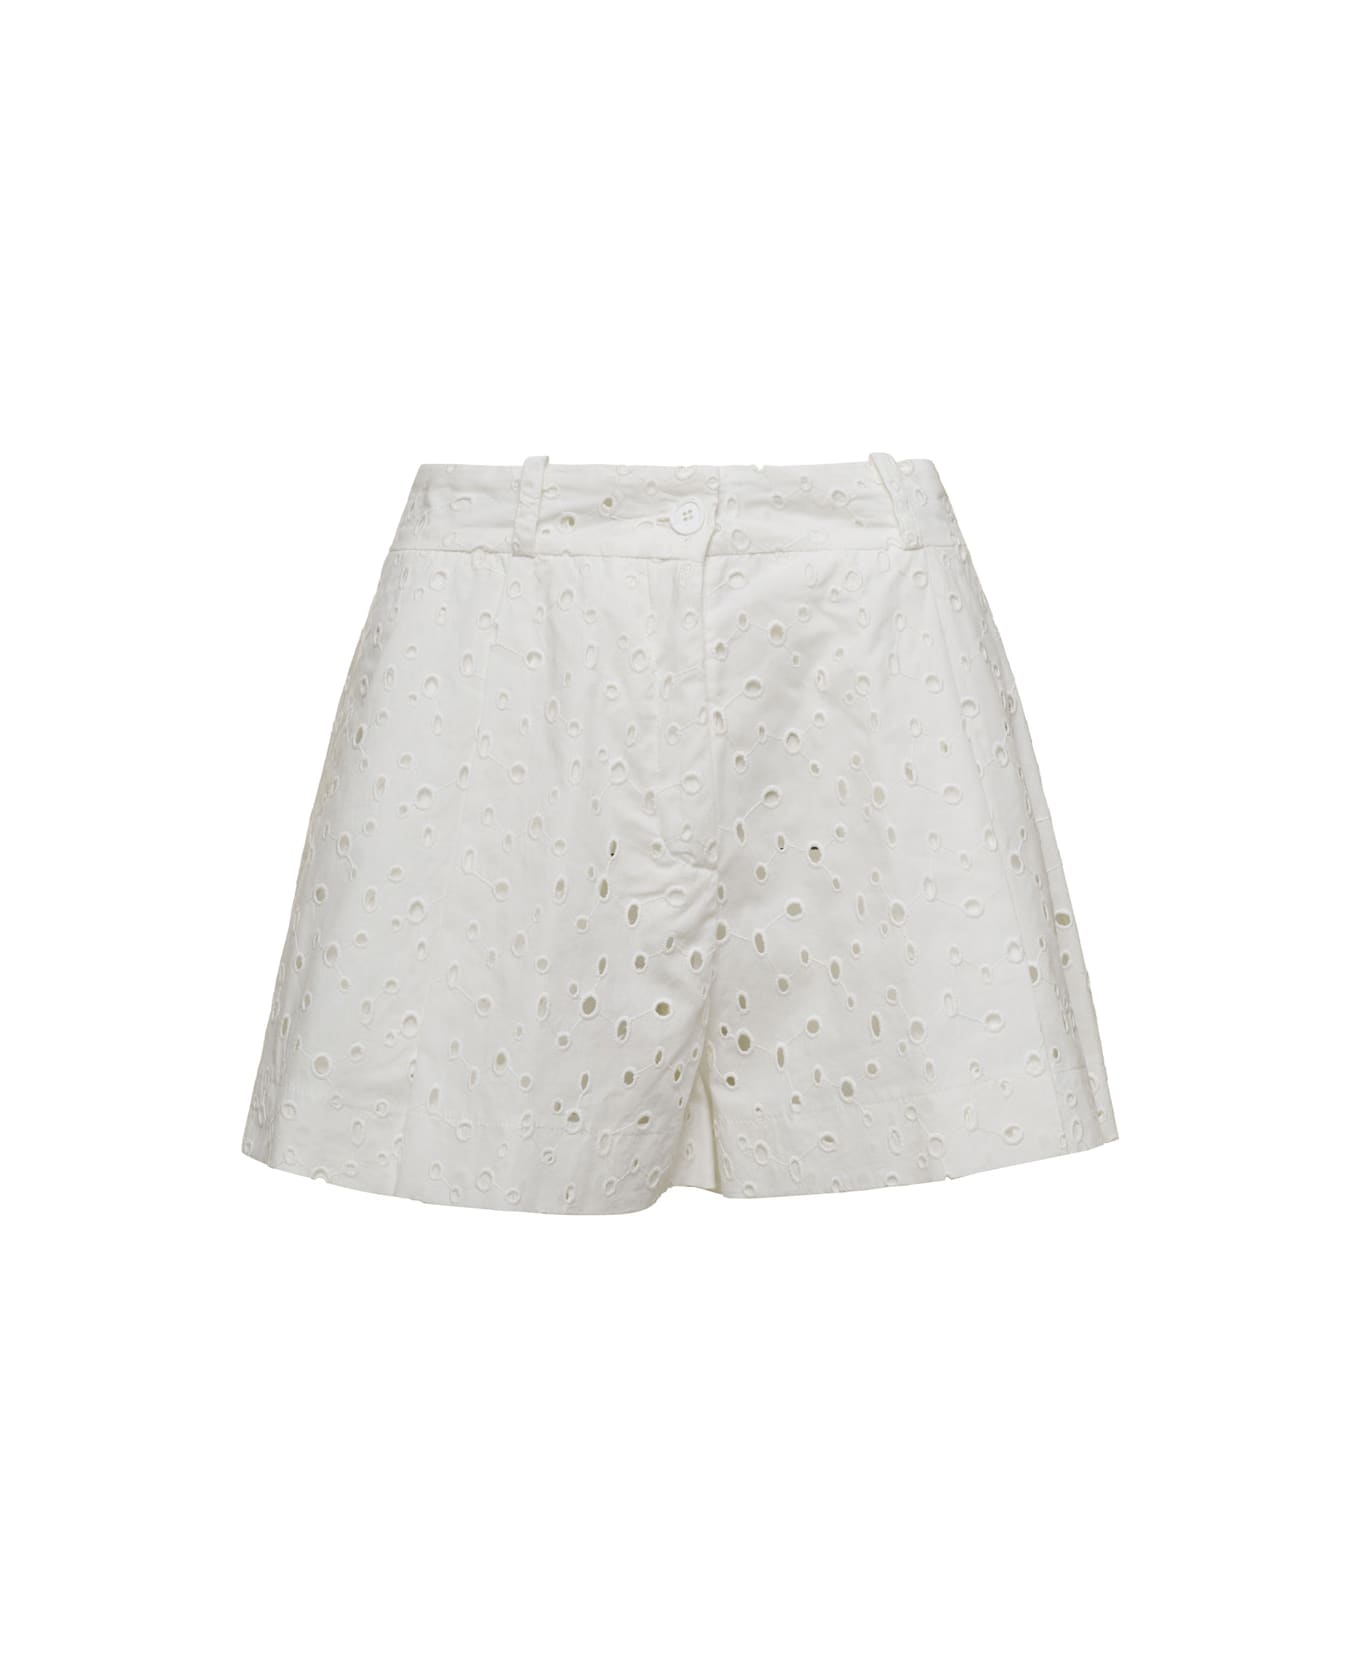 SEMICOUTURE White Broderie Anglaise Shorts In Cotton Blend Woman - White ショートパンツ